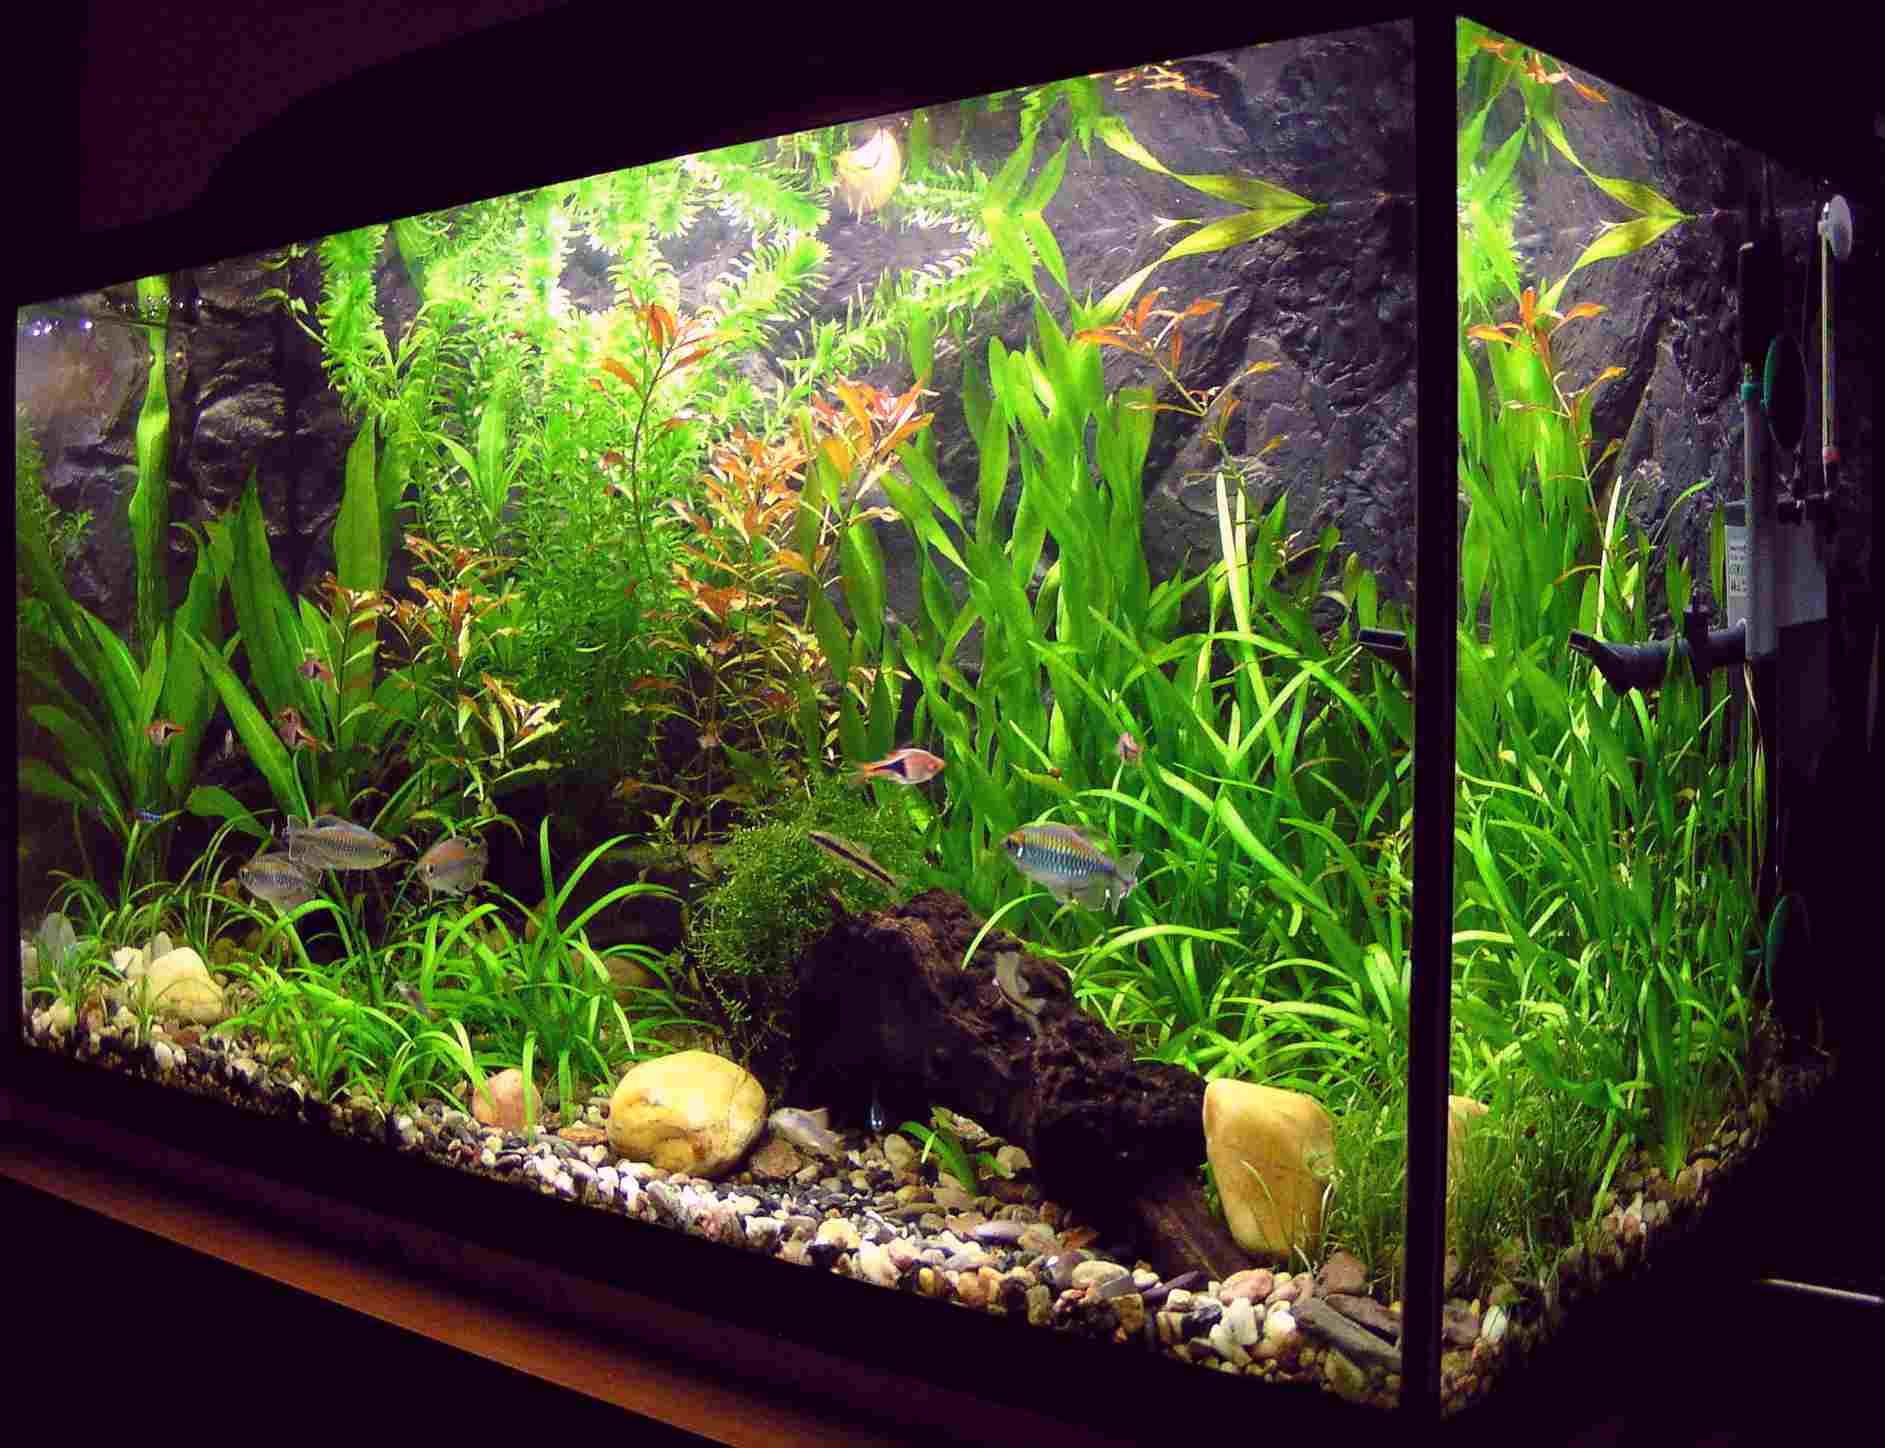 8 Things You Need to Setup Your Own Little Aquarium image